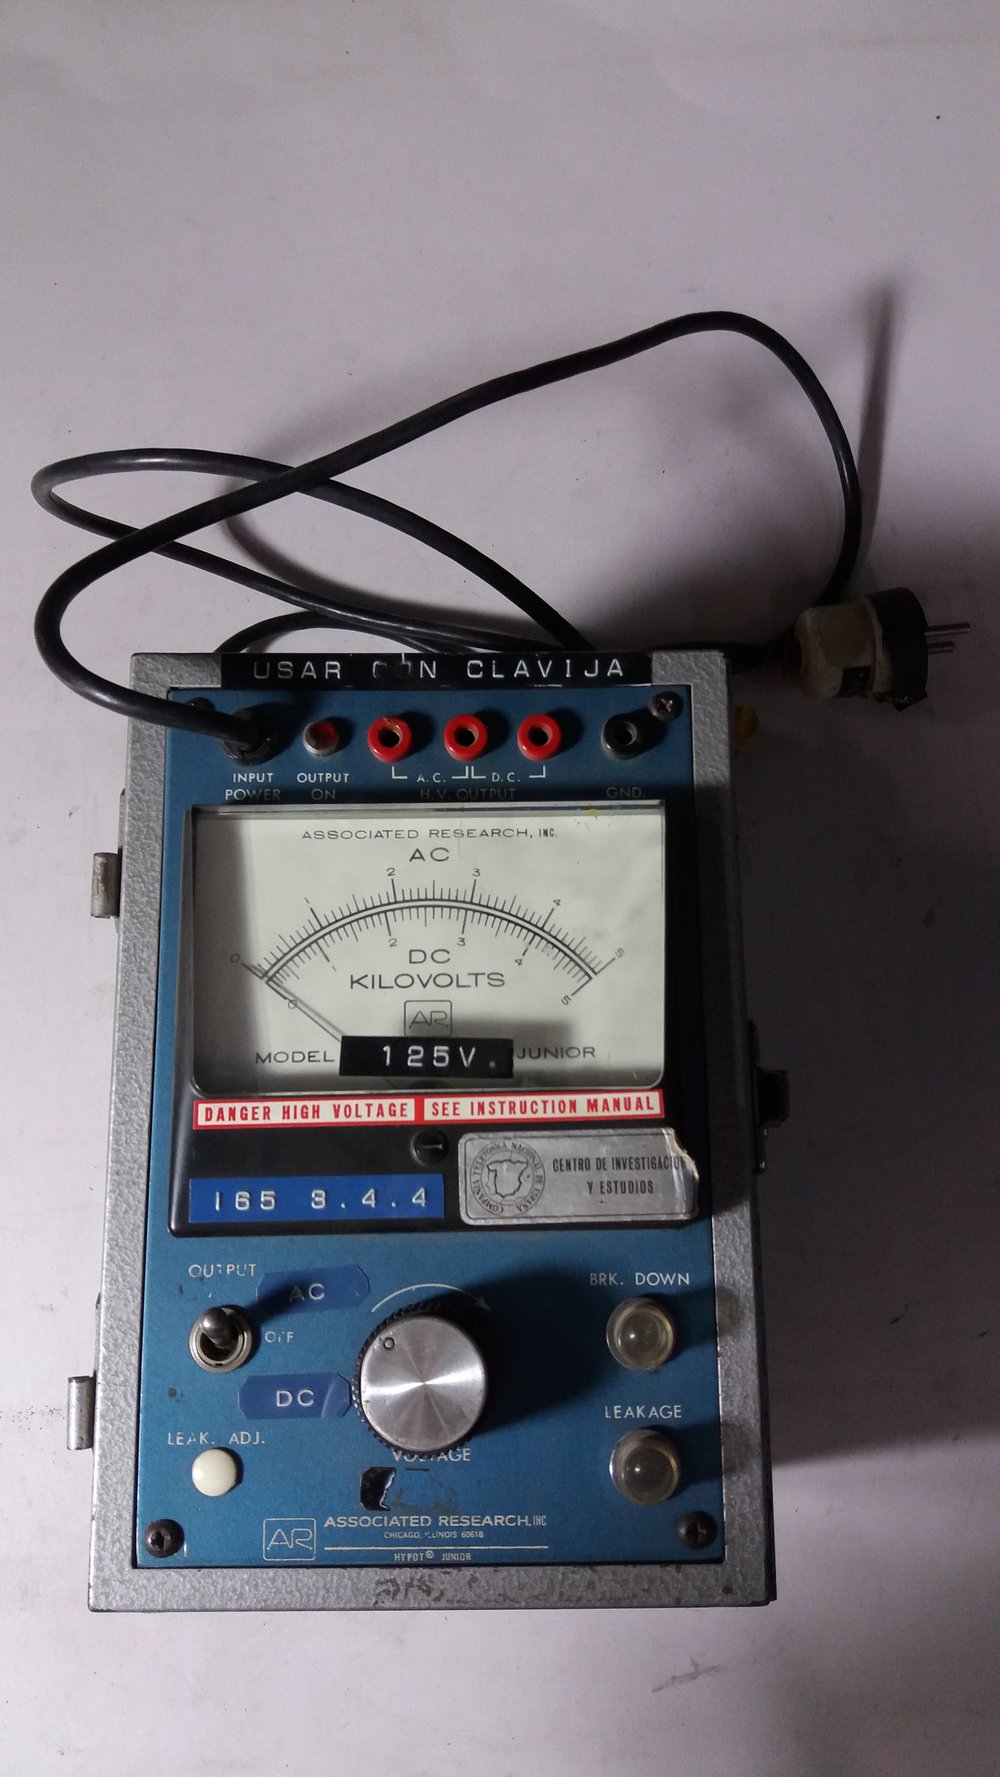 It was born in response to the high demand for portable measuring devices for high voltages. This model incorporates features that were previously unavailable. It is used for dielectric resistance measurements.